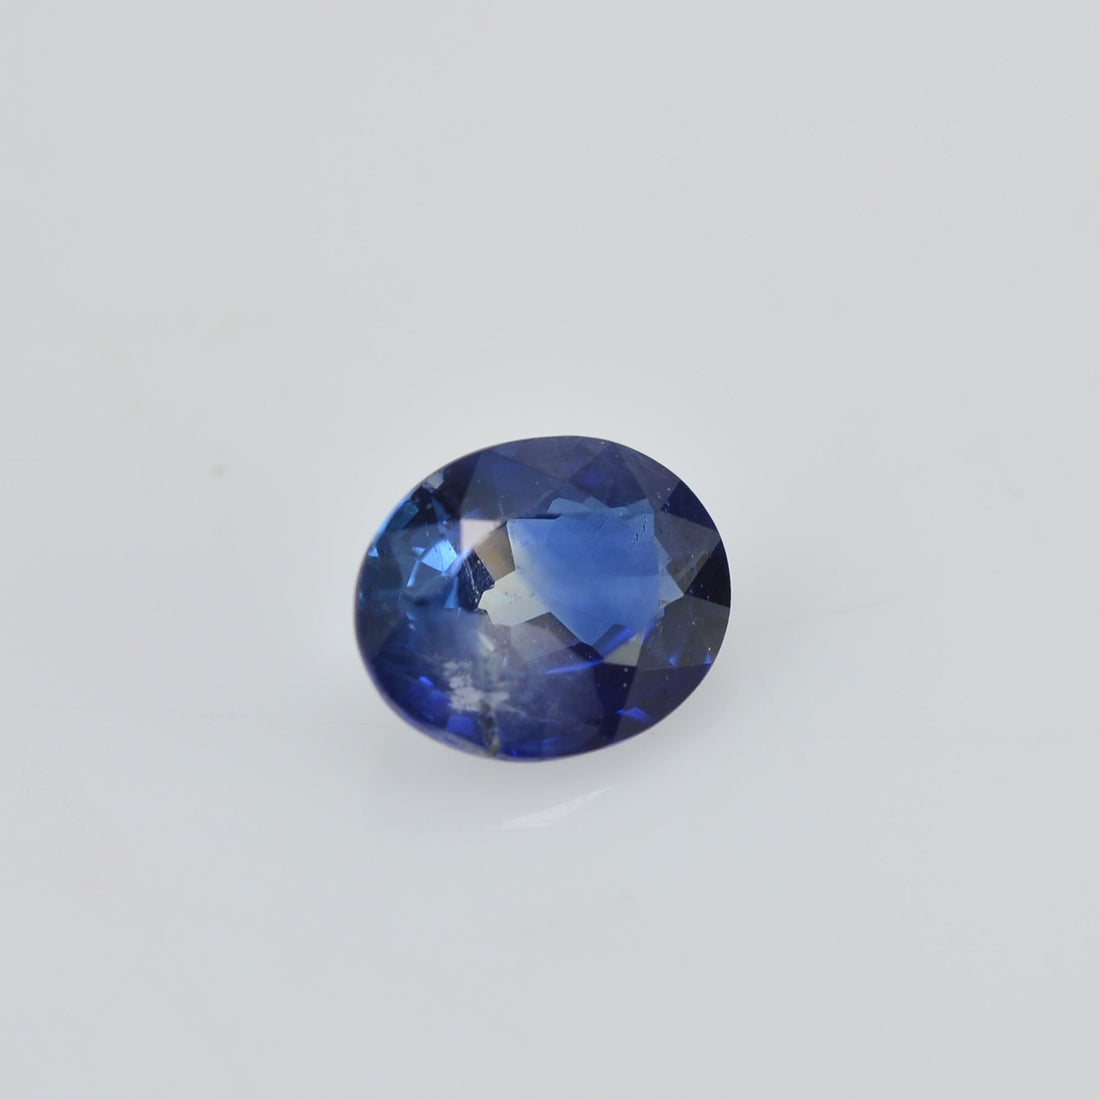 0.43 cts Natural Blue Sapphire Loose Gemstone Oval Cut